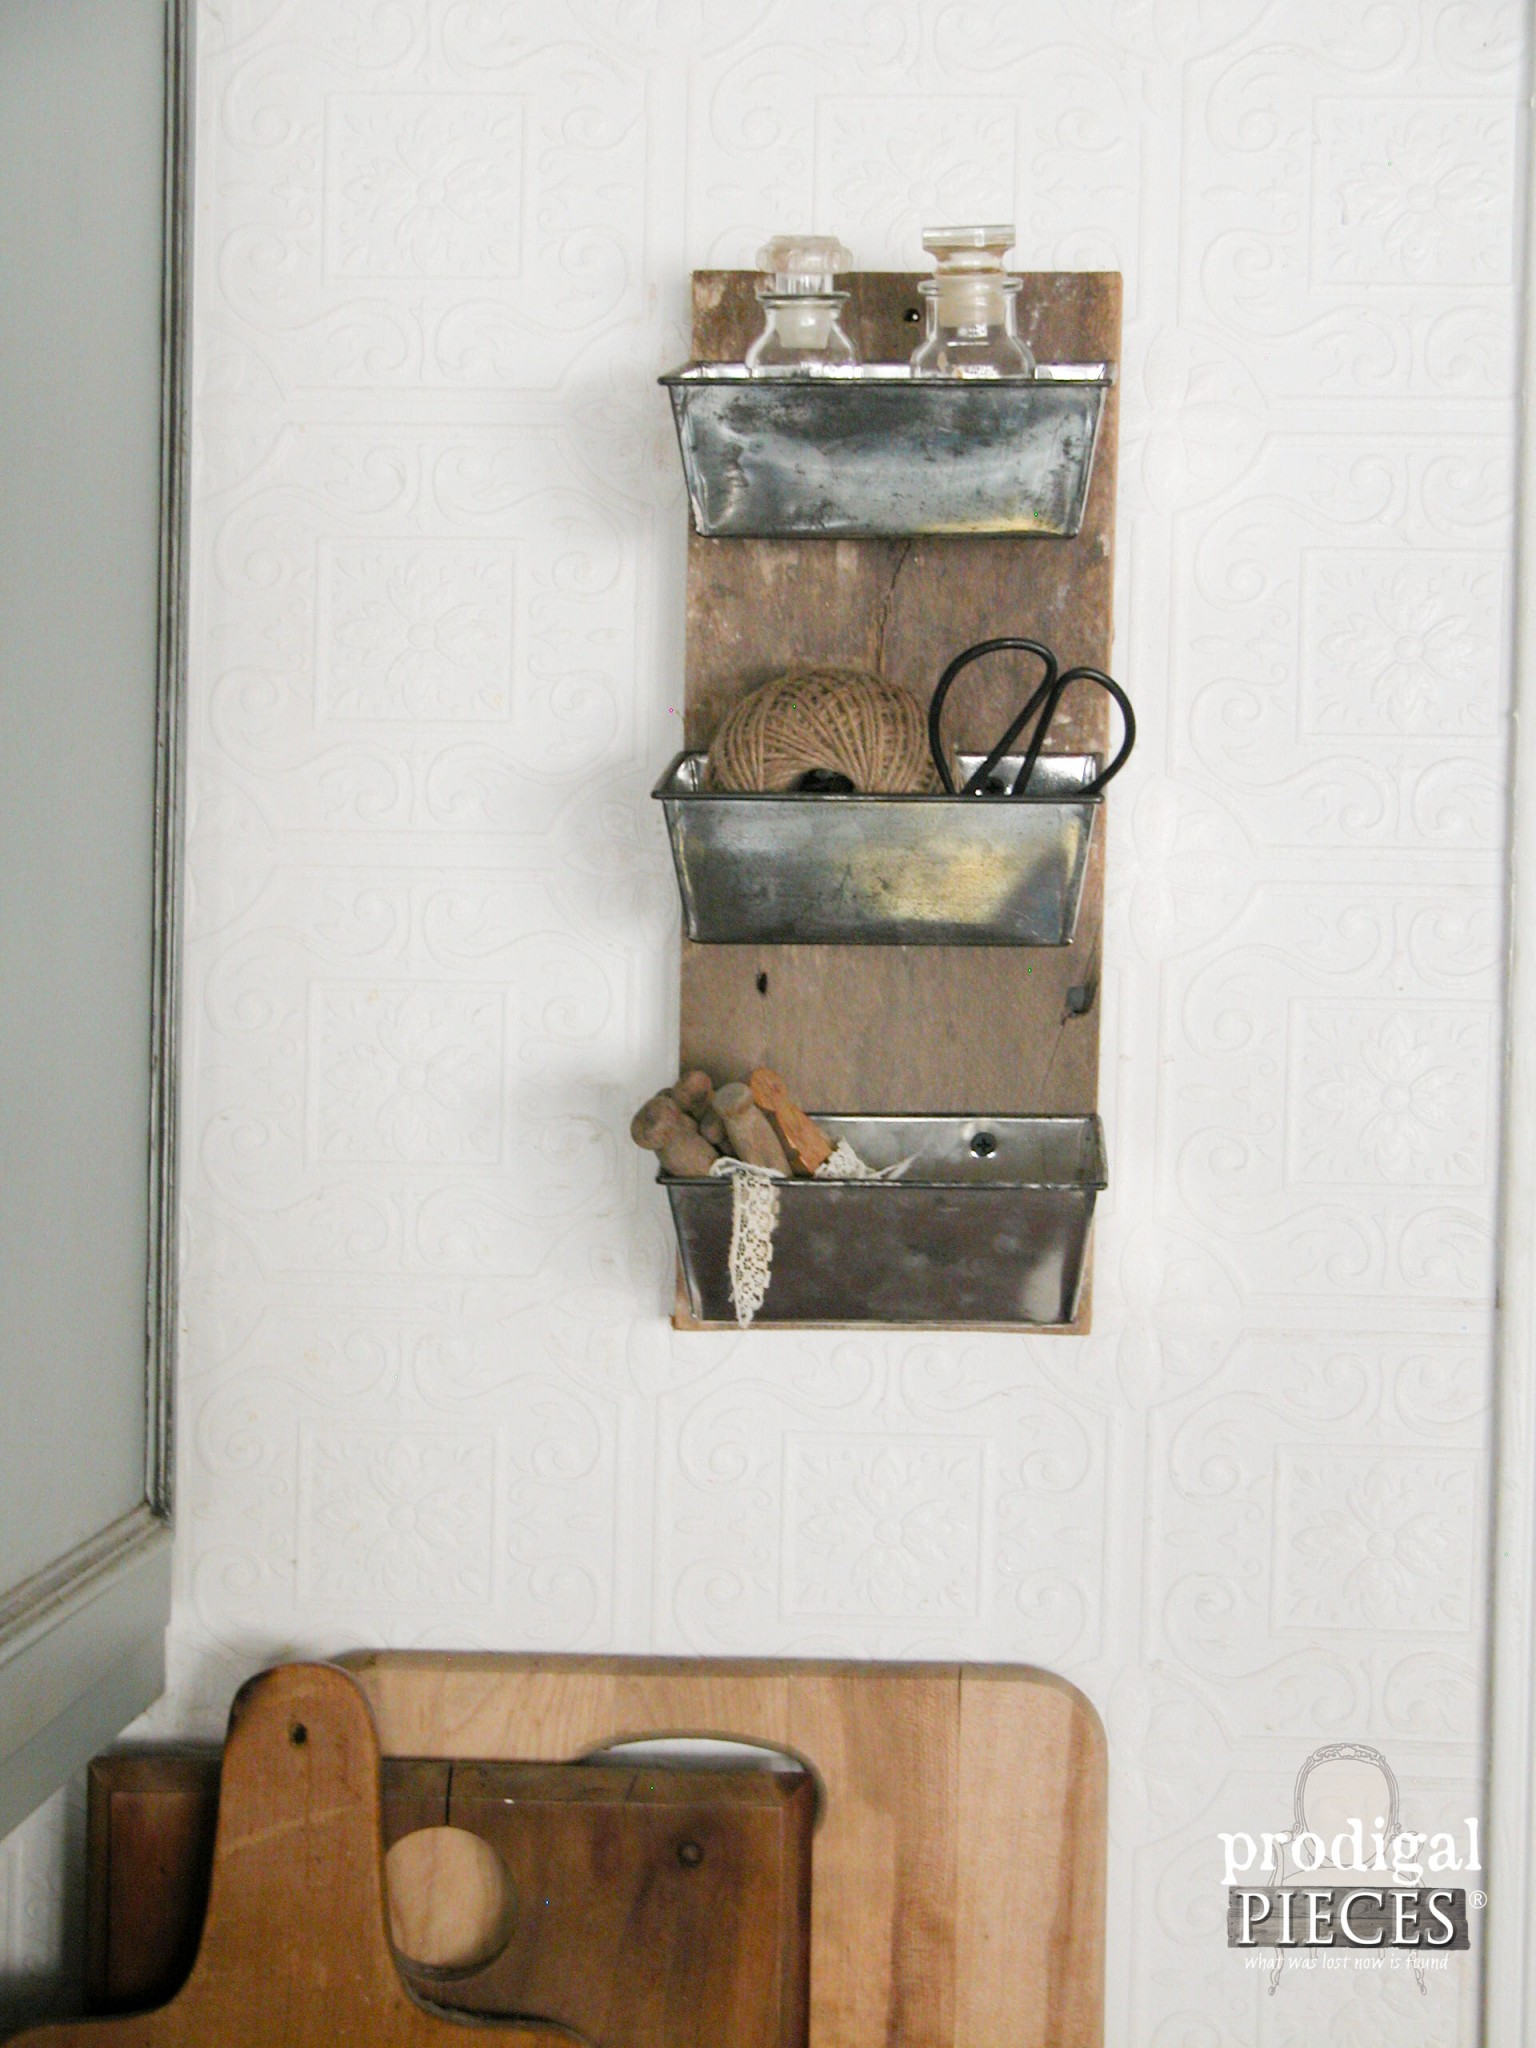 Repurposed Barn Wood Kitchen Decor by Prodigal Pieces | prodigalpieces.com